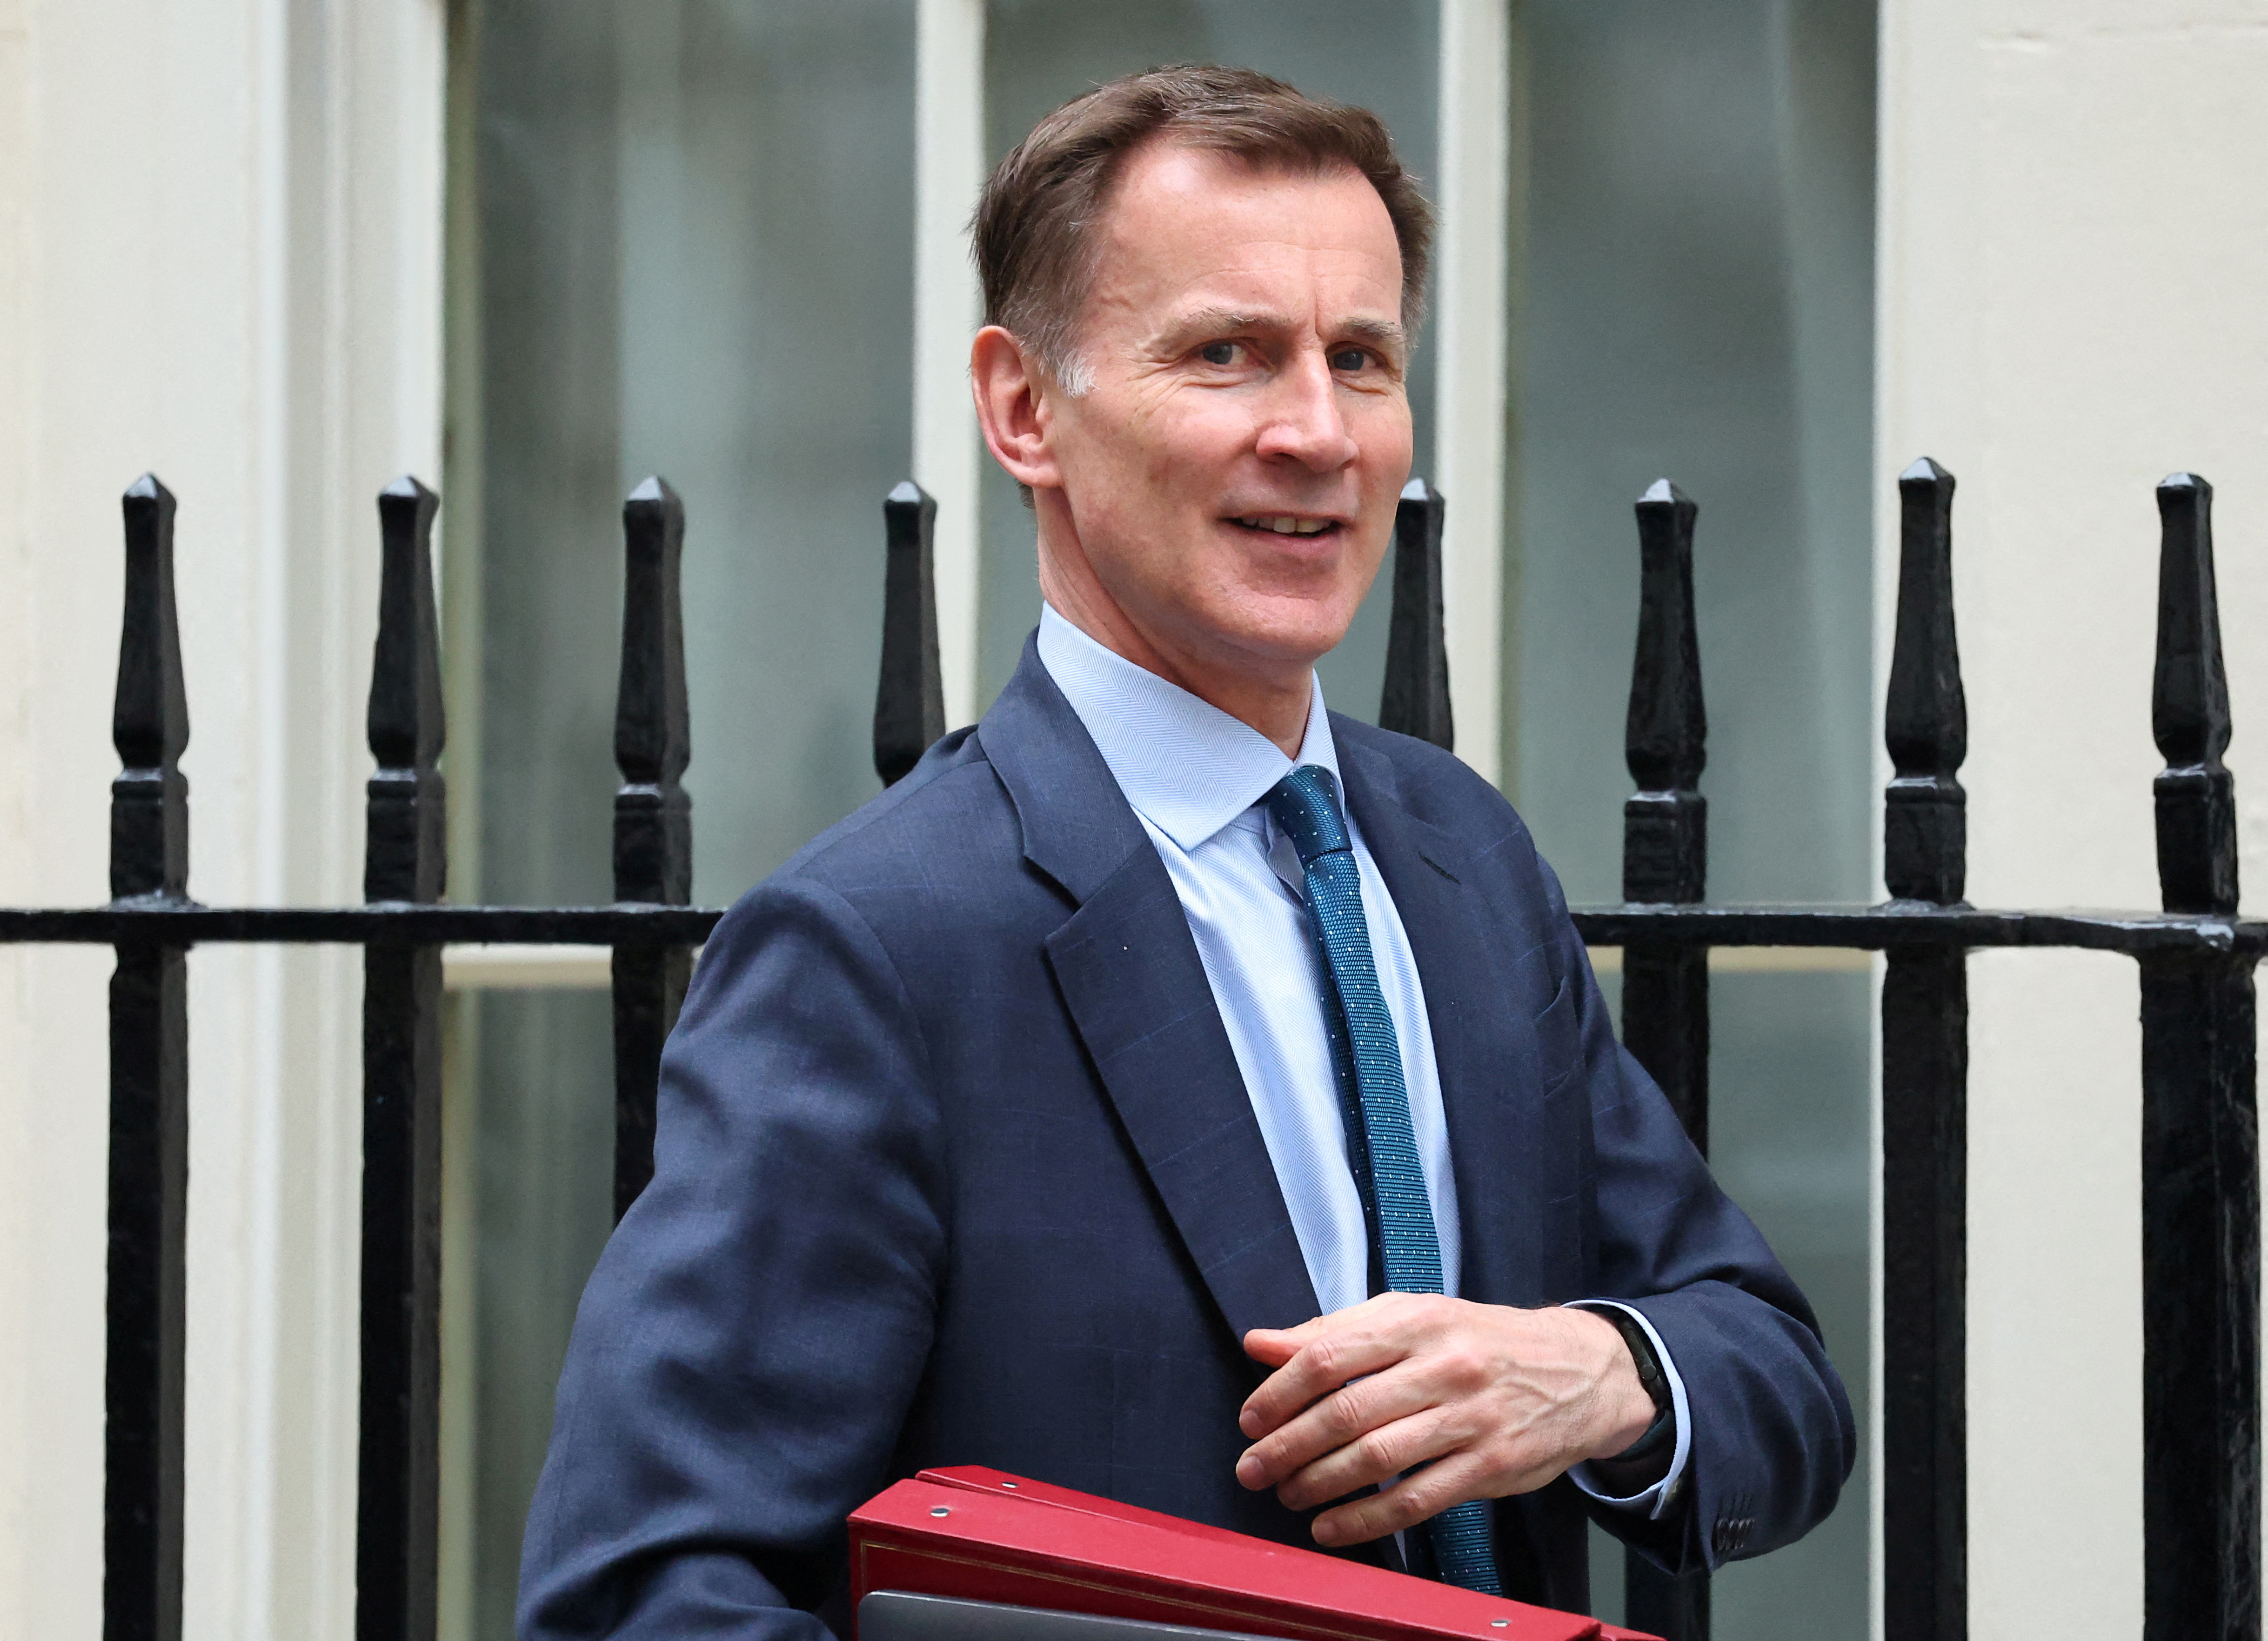 Jeremy Hunt says that Britain is getting ready to fire up the economy, insisting that the priority has been tackling inflation